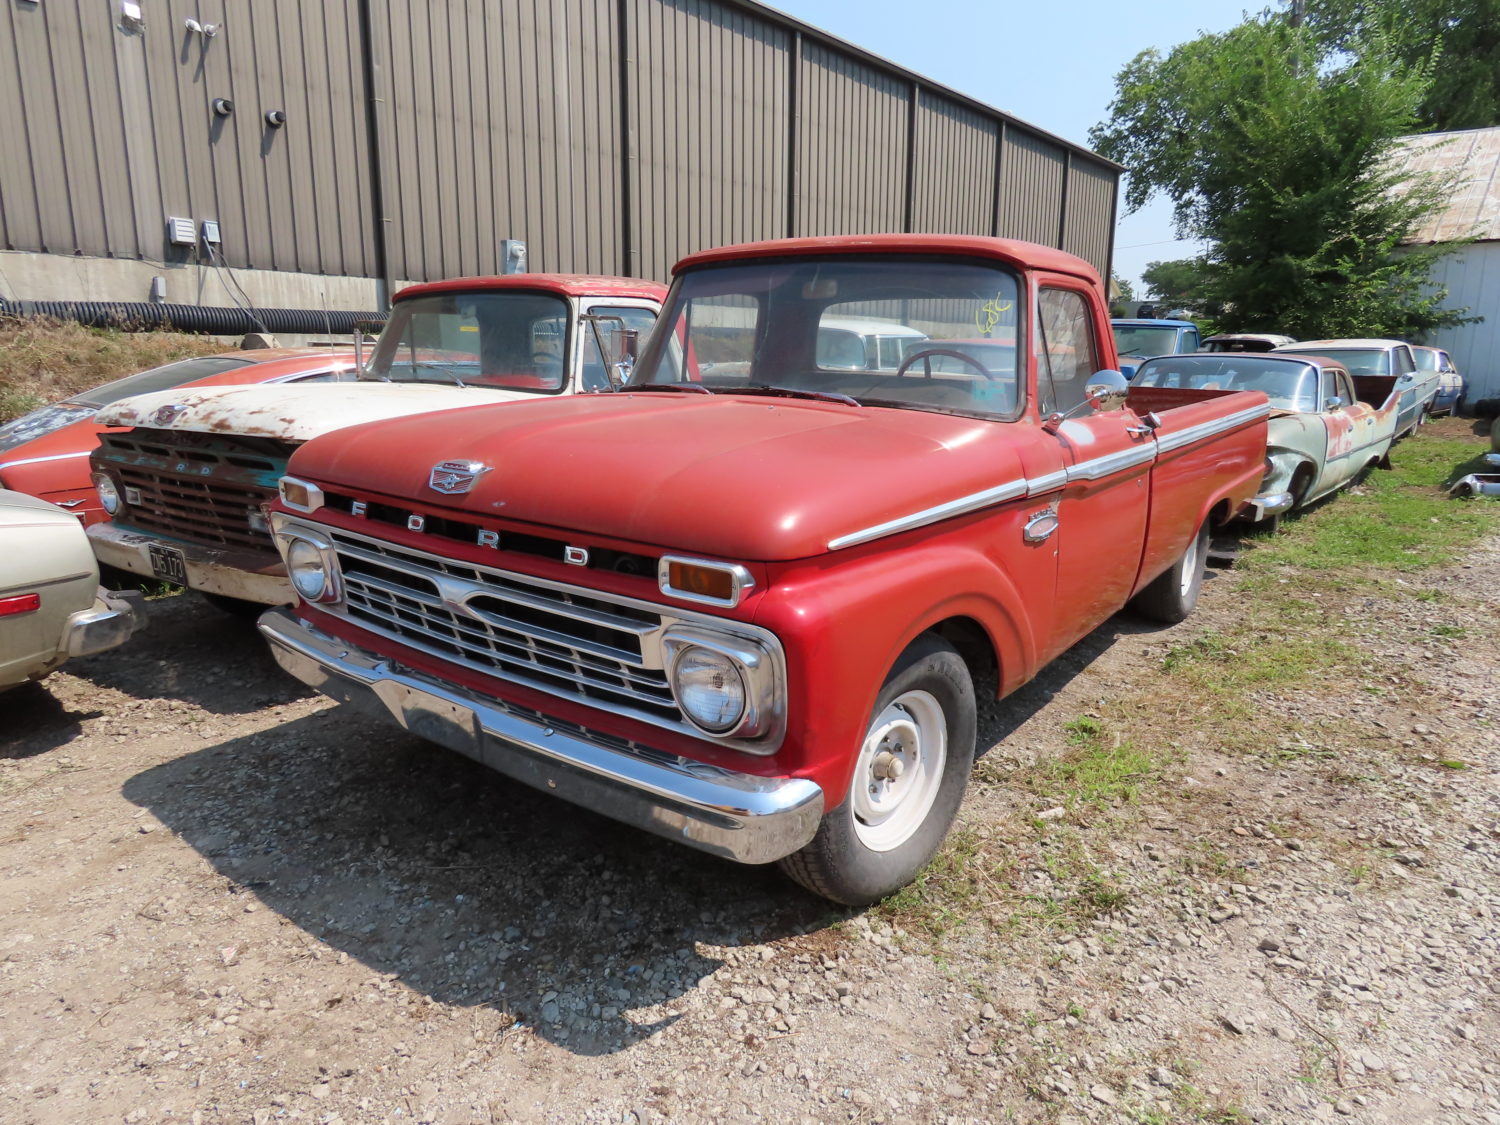 Approx. 100 American Classics Cars At Auction! The Sorensen Collection-LIVE ONSITE W/ONLINE BIDDING!  - image 10